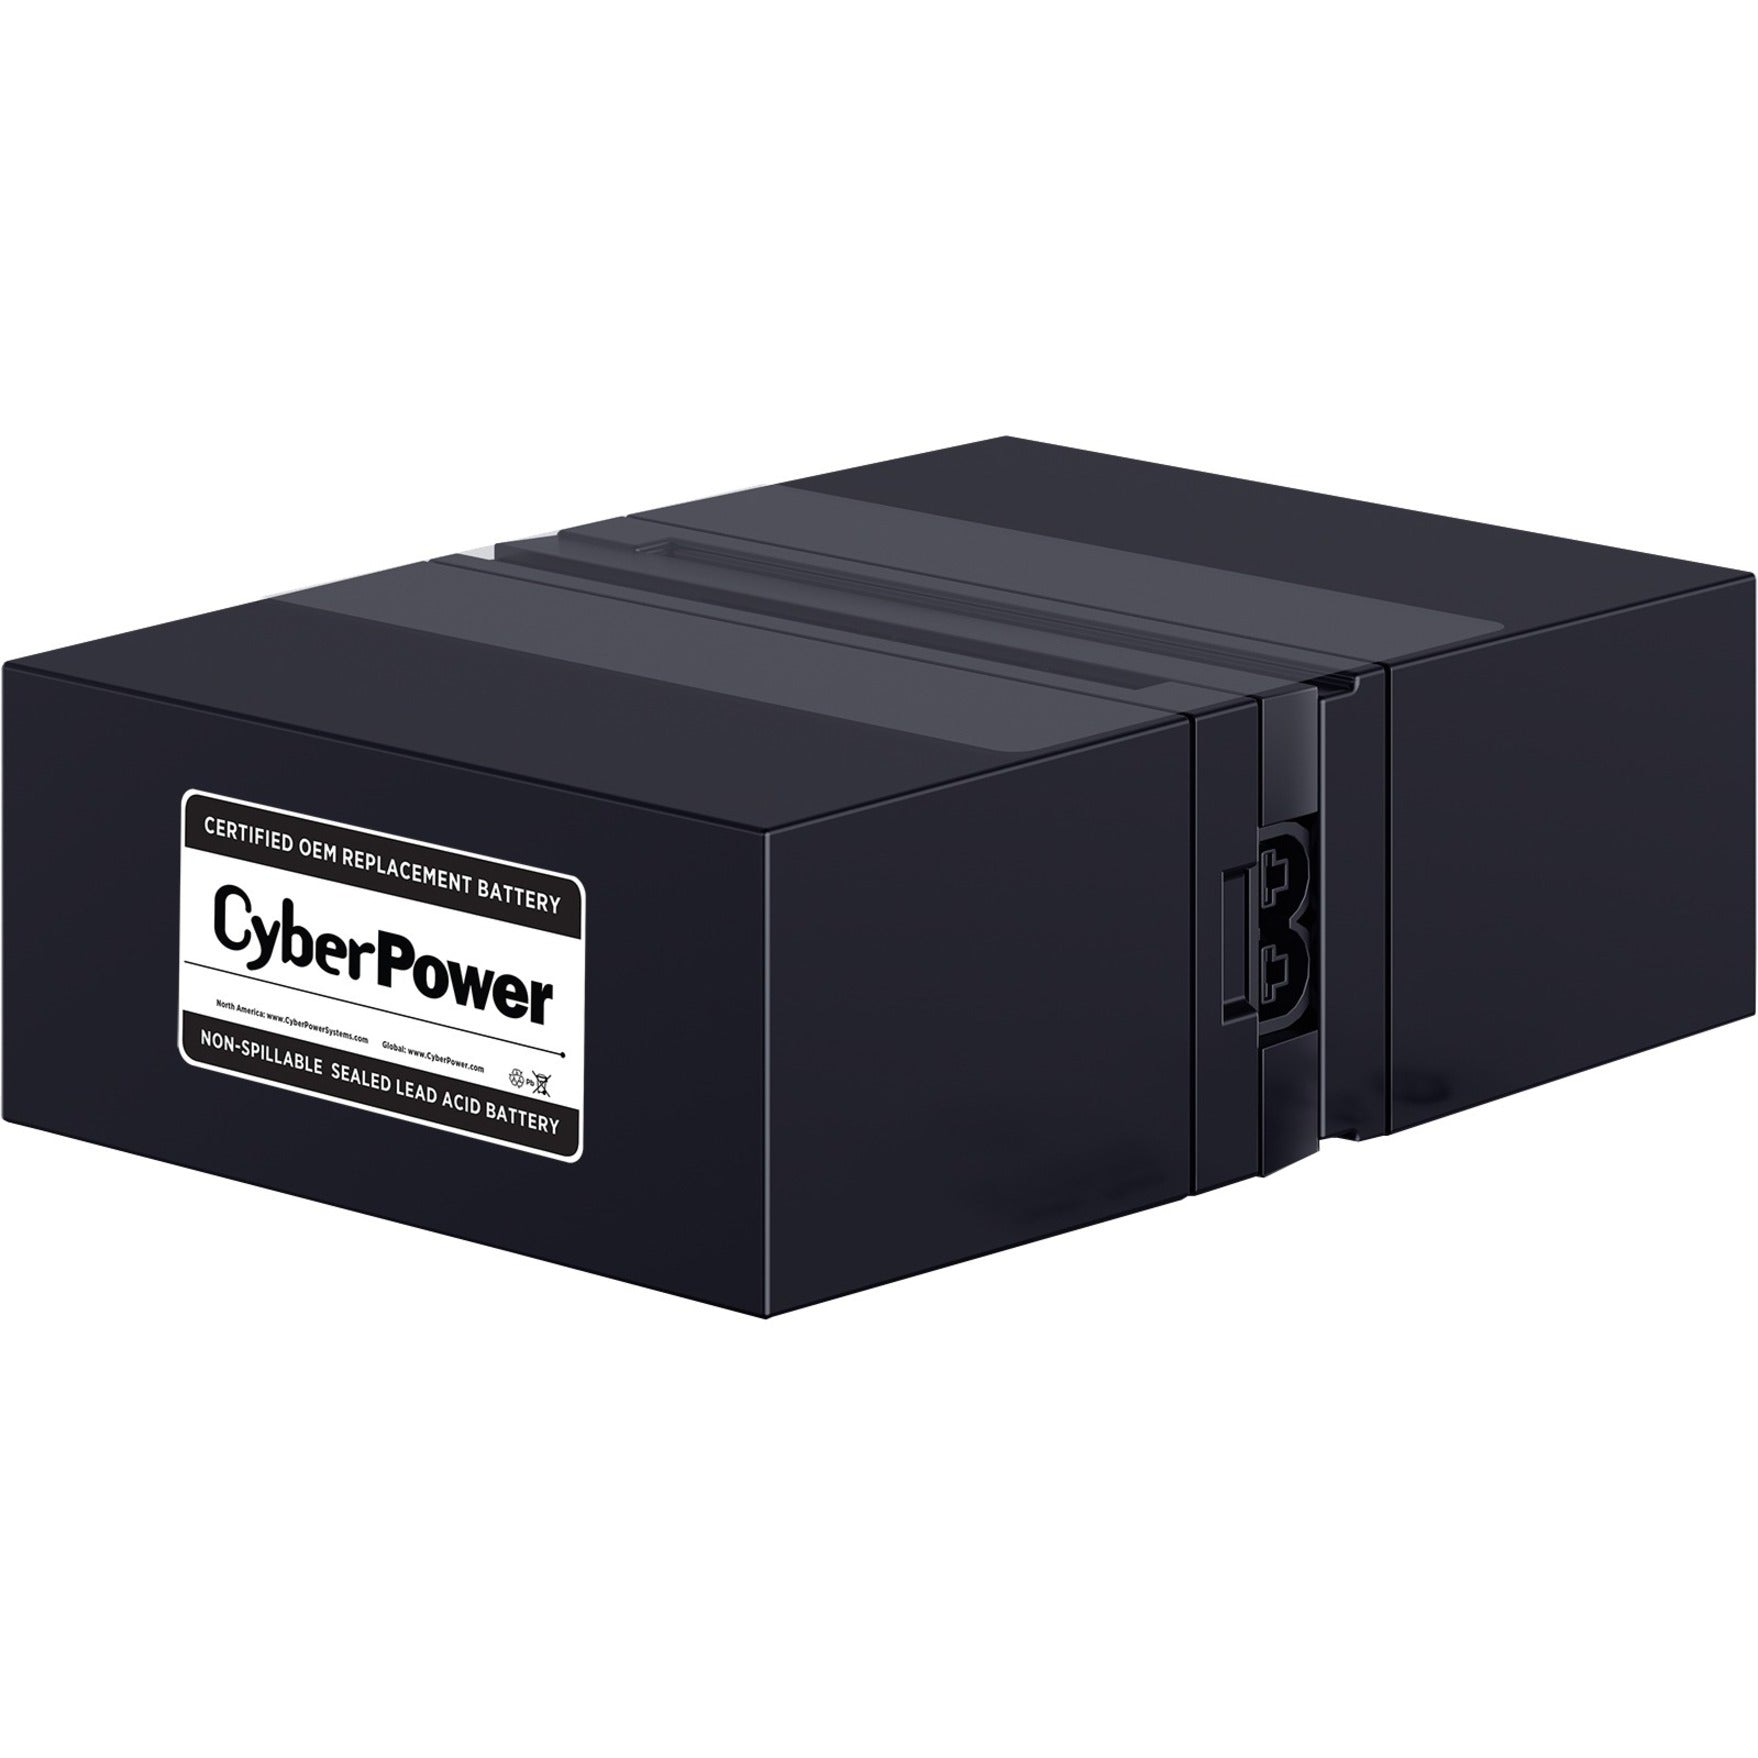 CyberPower RB1280X2B UPS Replacement Battery Cartridge 12V 8AH, 18 Month Warranty, Lead Acid, User Replaceable